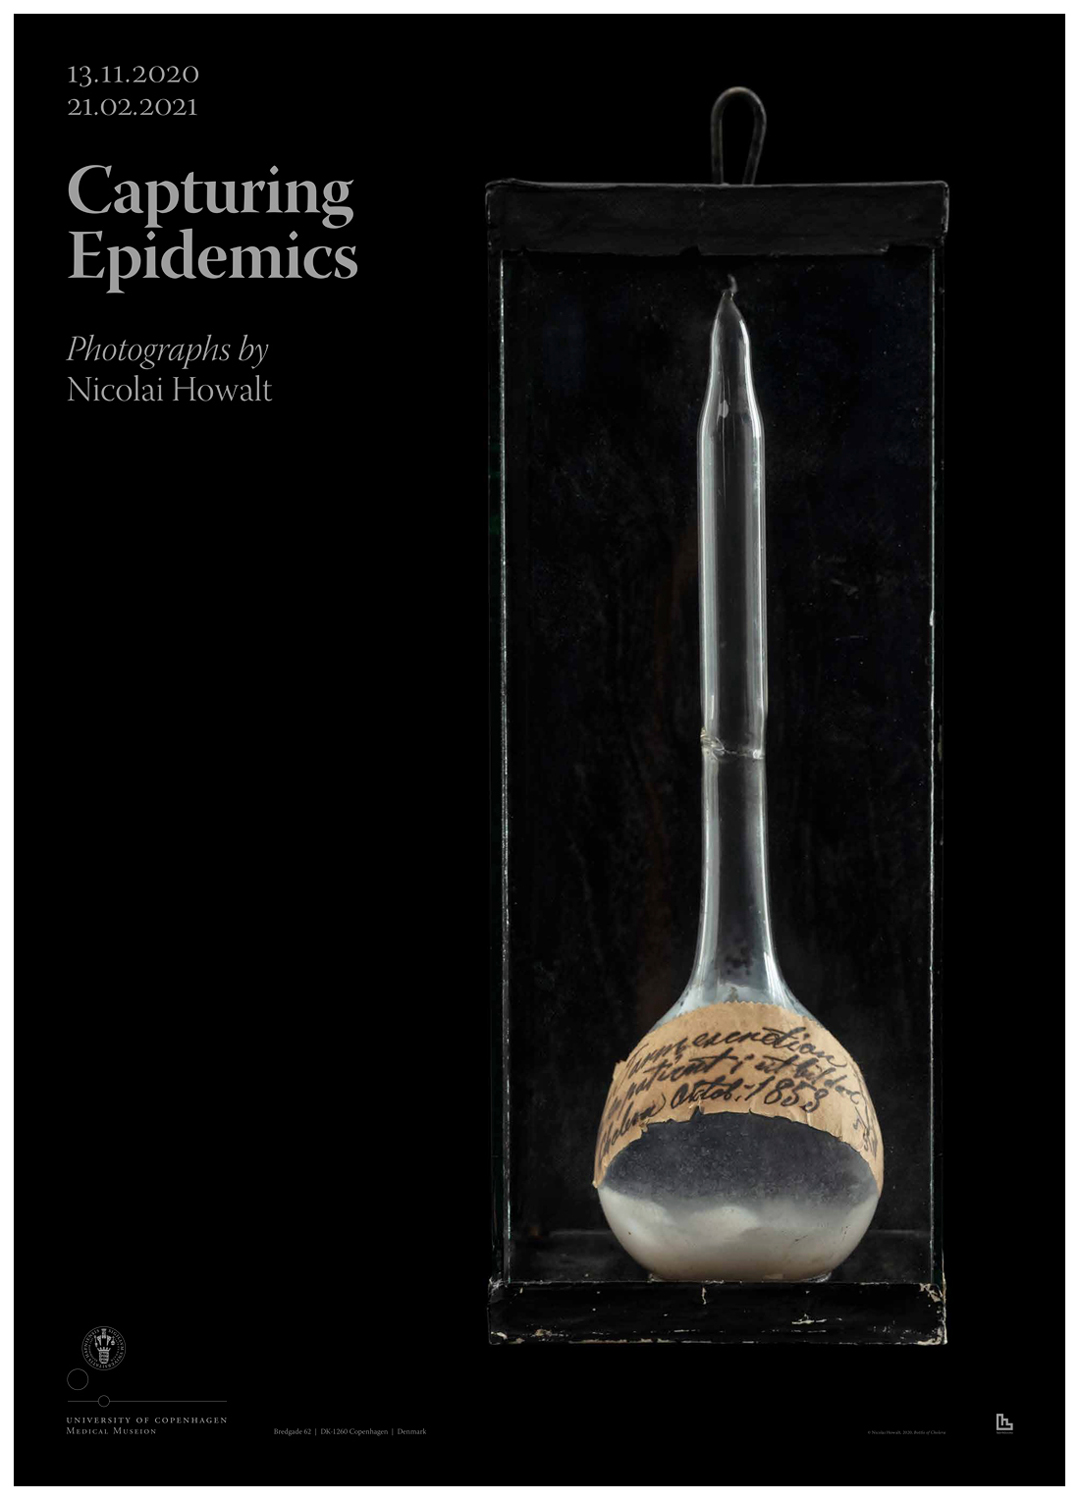 poster by Nicolai Howalt from the exhibition Capturing Epidemics at Medical Museion